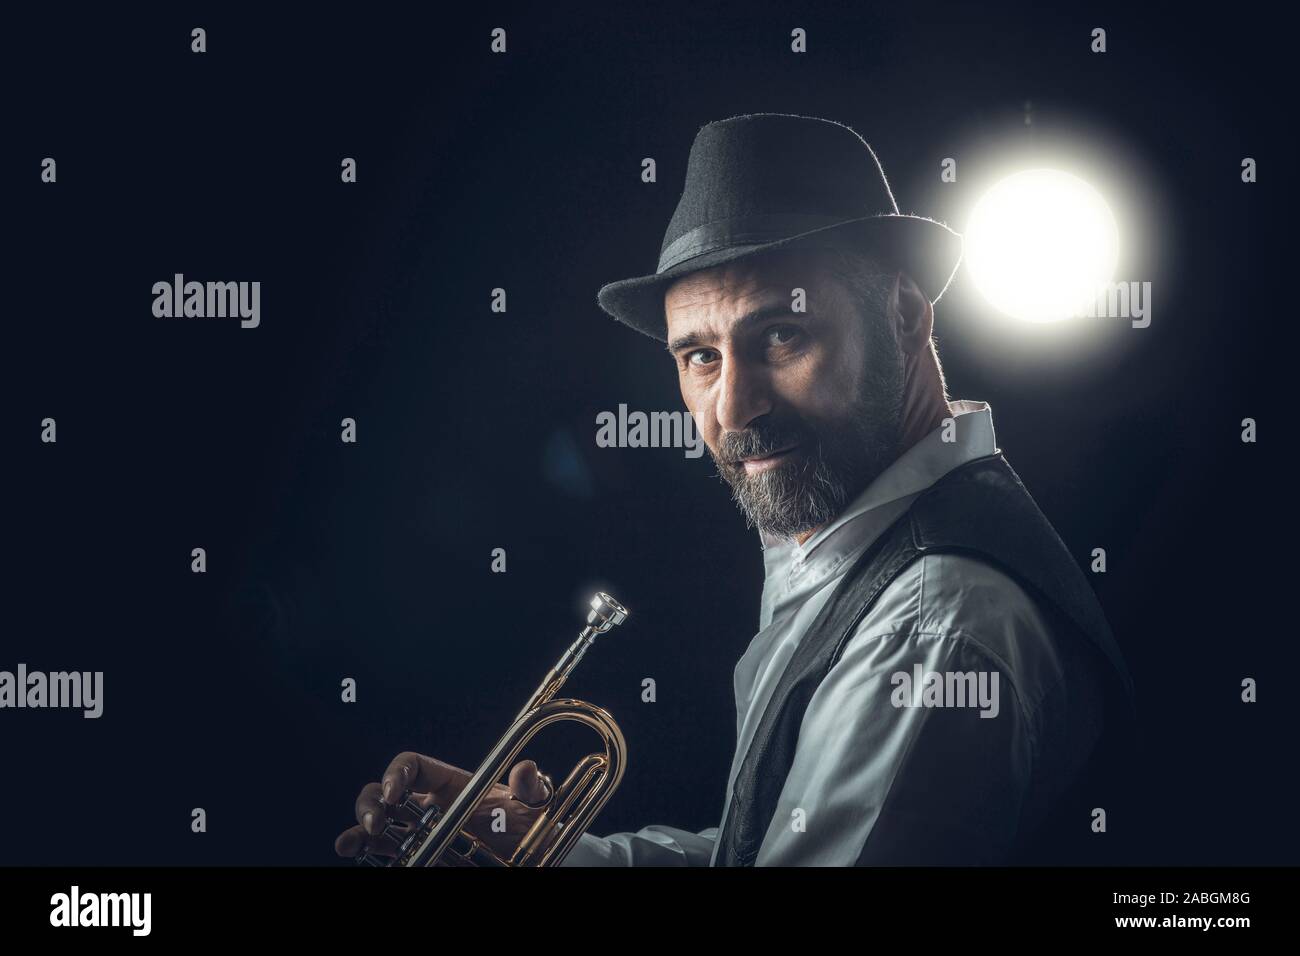 jazz trumpet player on a dark background. Portrait performed in the studio Stock Photo